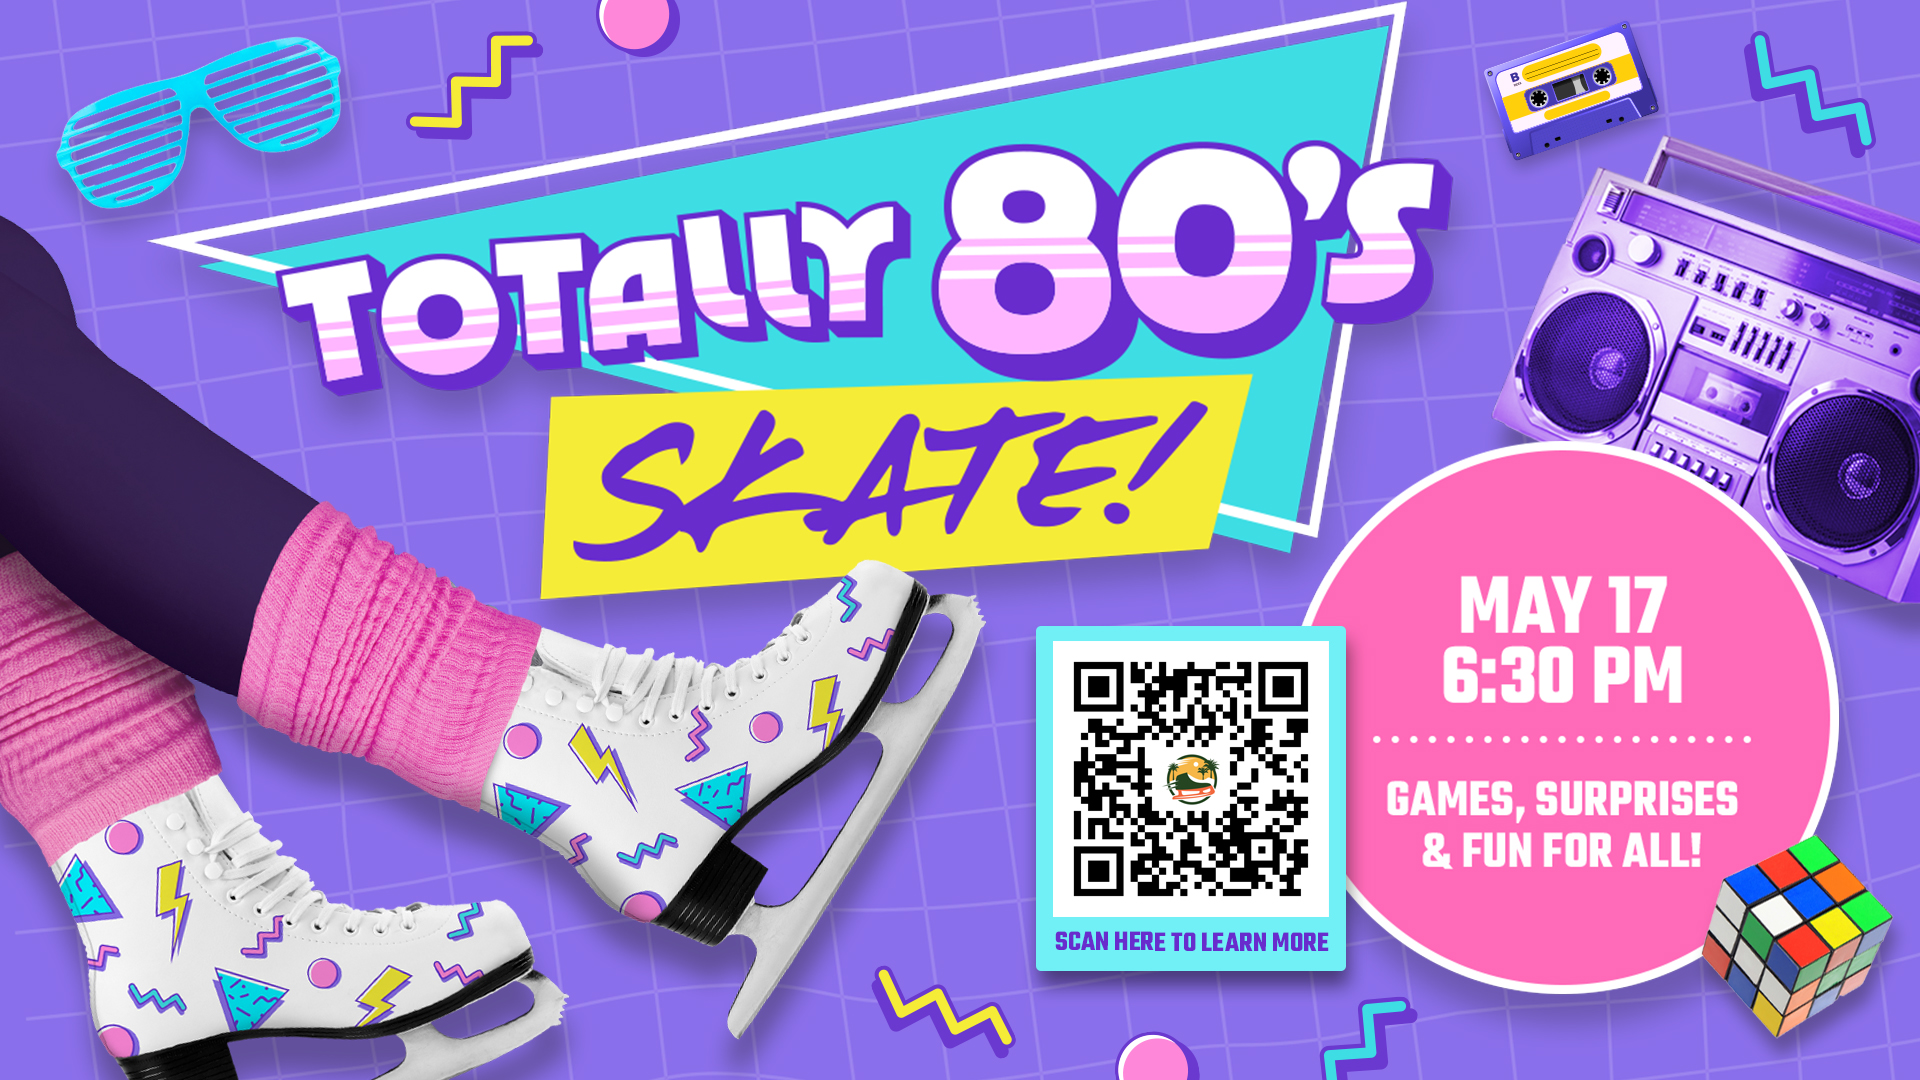 Come skate back to the Totally 80’s with awesome tunes and tubular games.